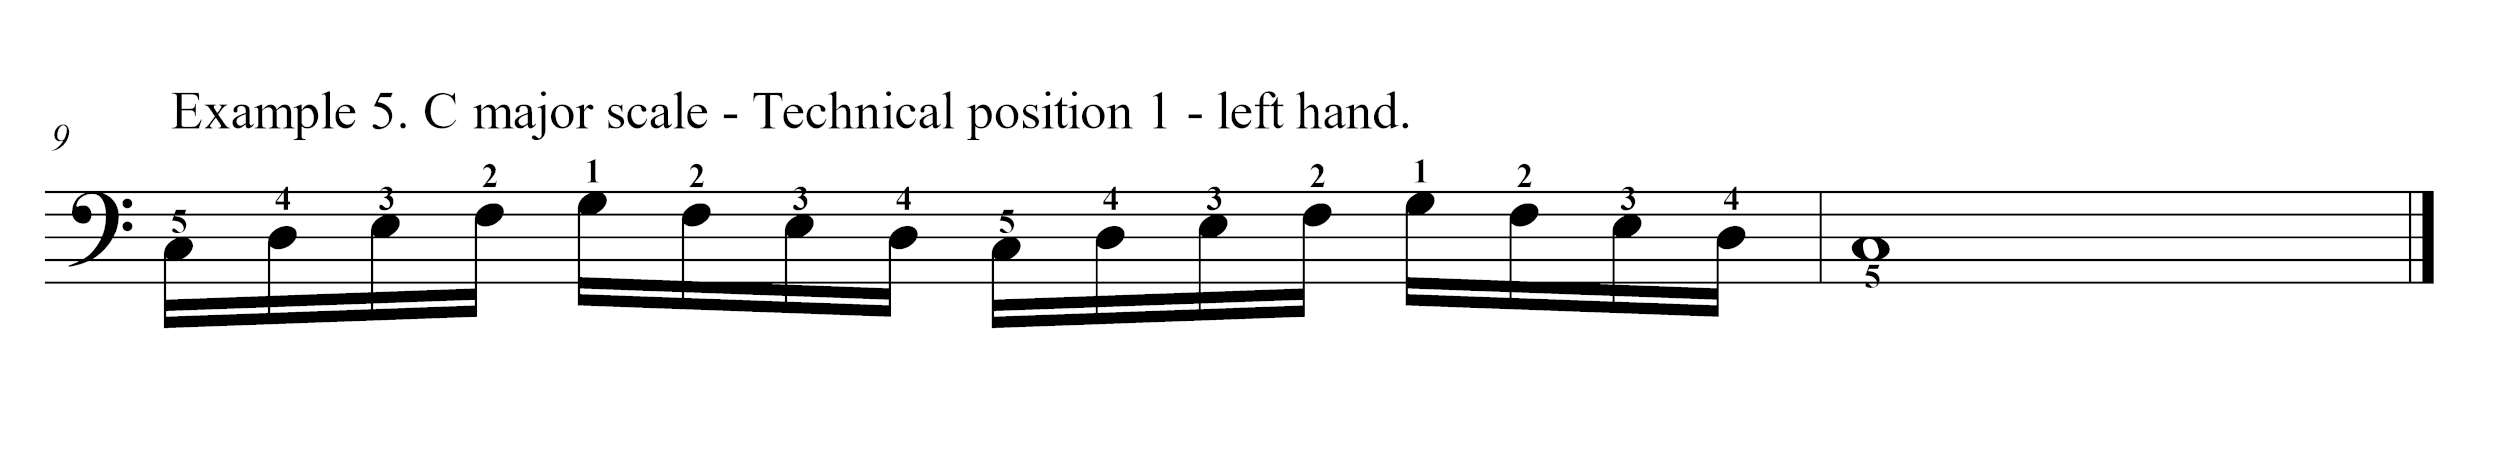 Technical position 1 left hand piano scale